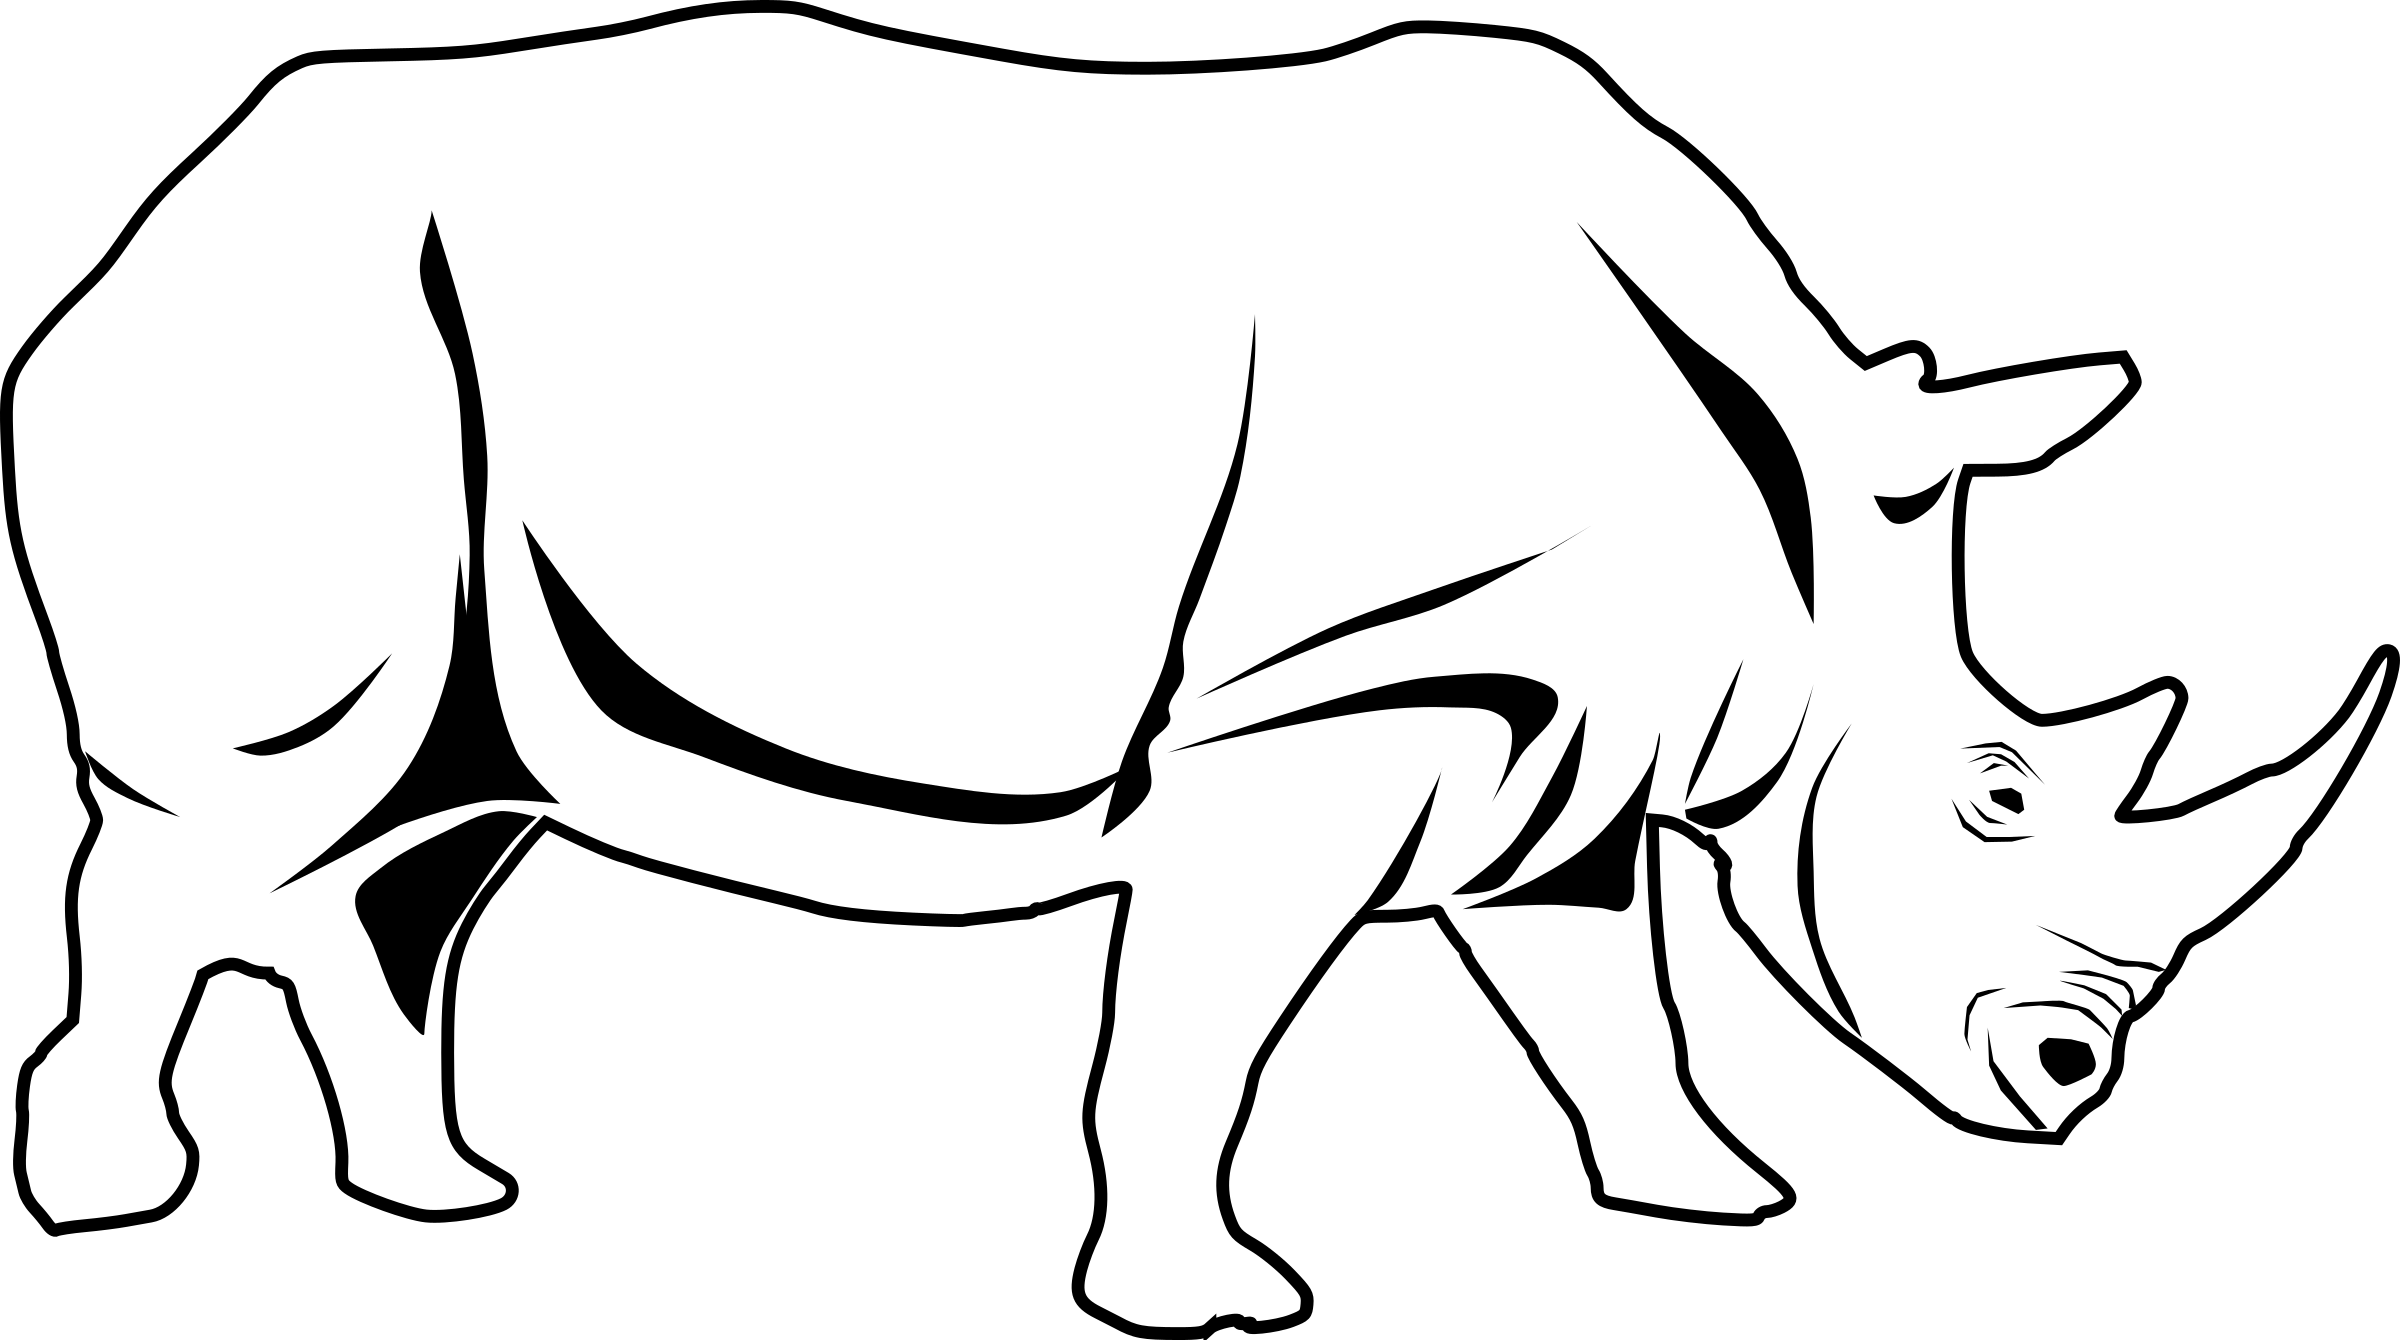 Big Image (Png) - Rhino Black And White, Transparent background PNG HD thumbnail